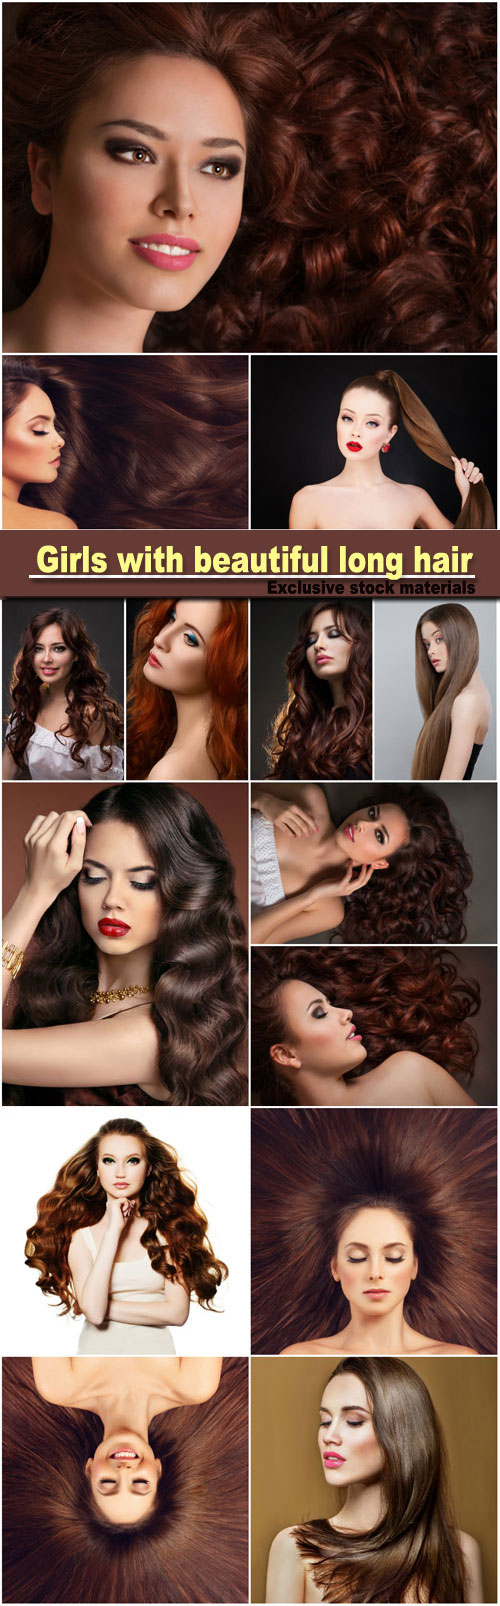 Girls with beautiful long hair, fashionable hairstyles